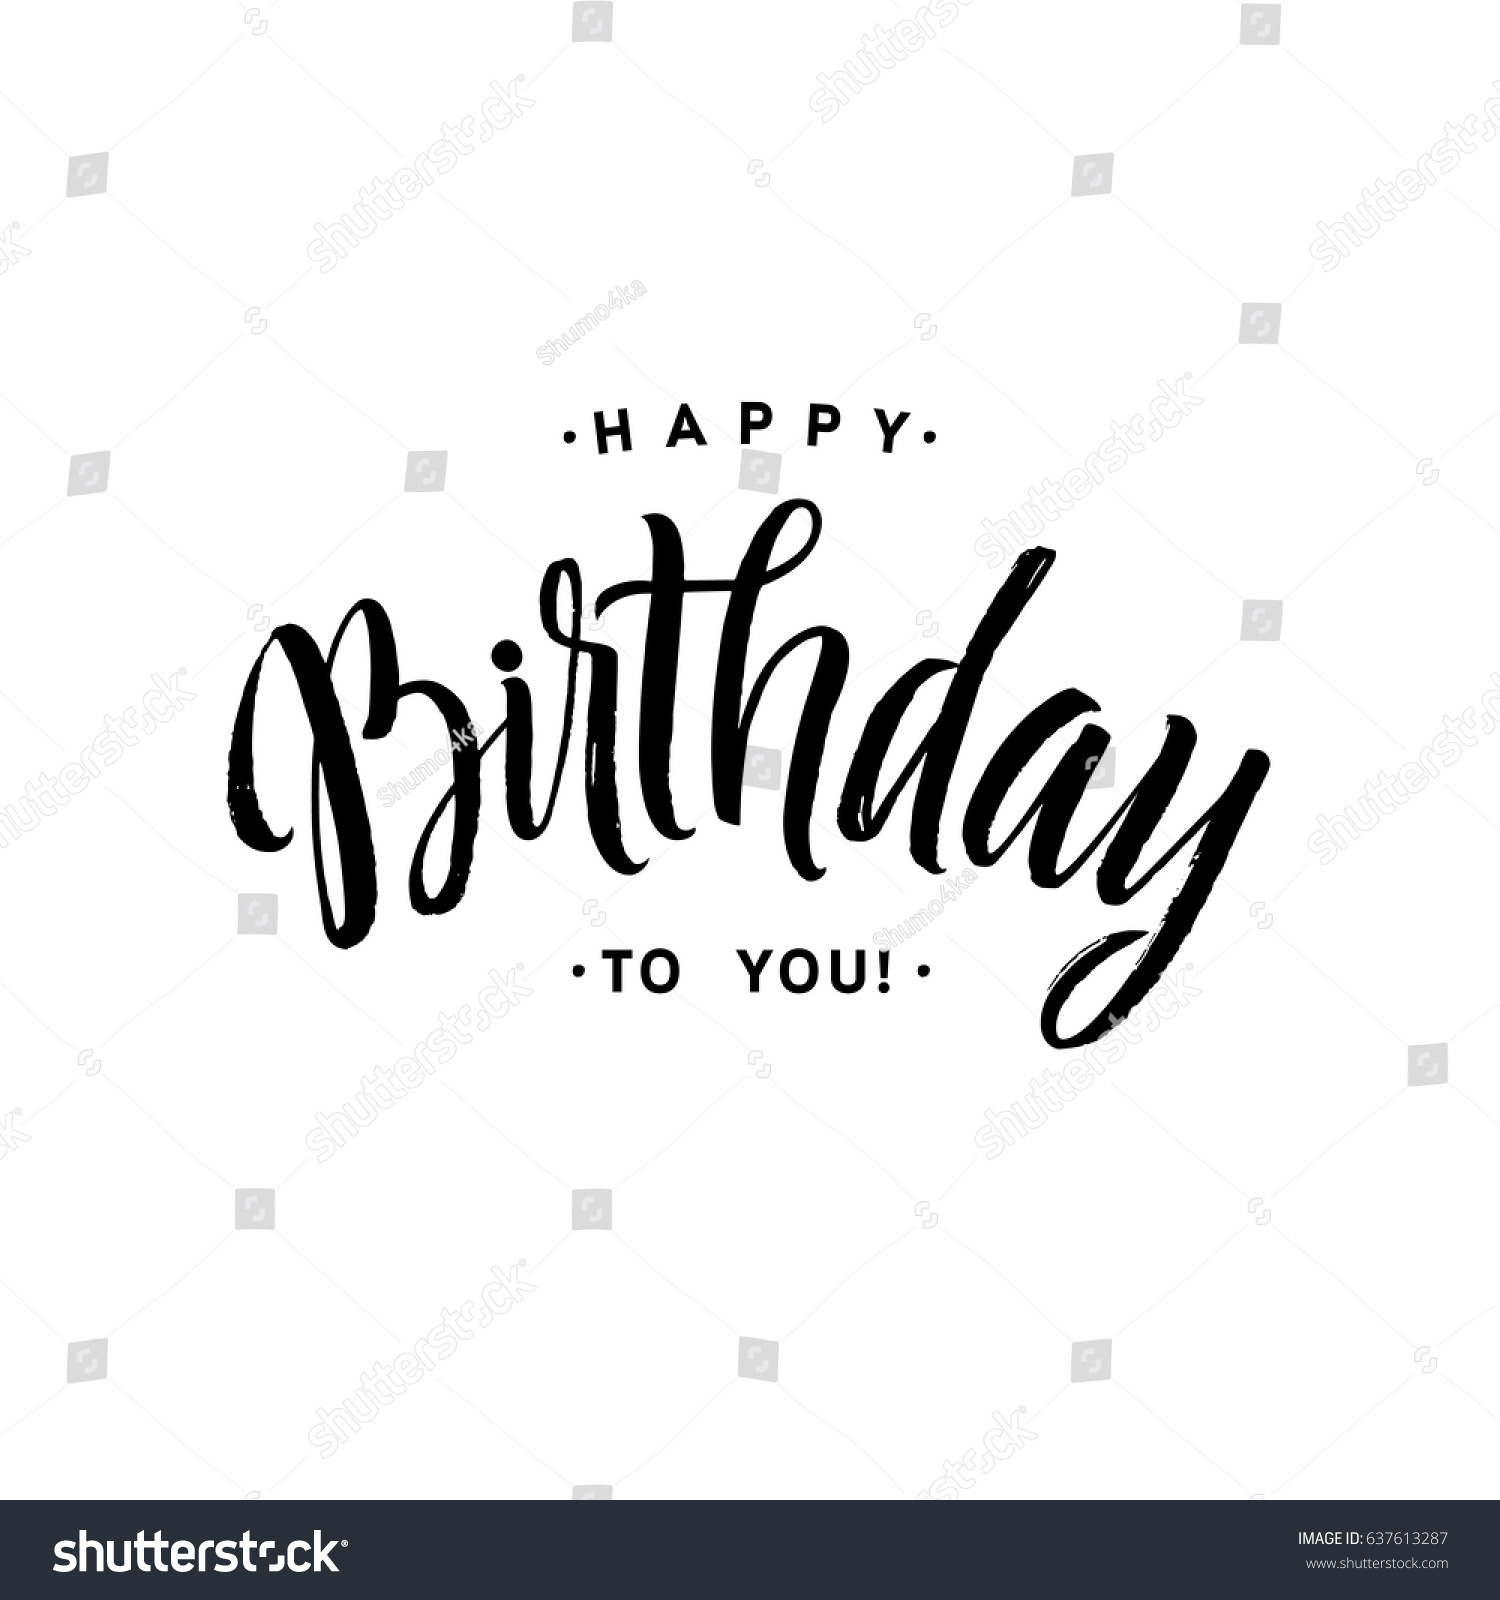 Happy Birthday You Calligraphy Greeting Card Stock Vector 